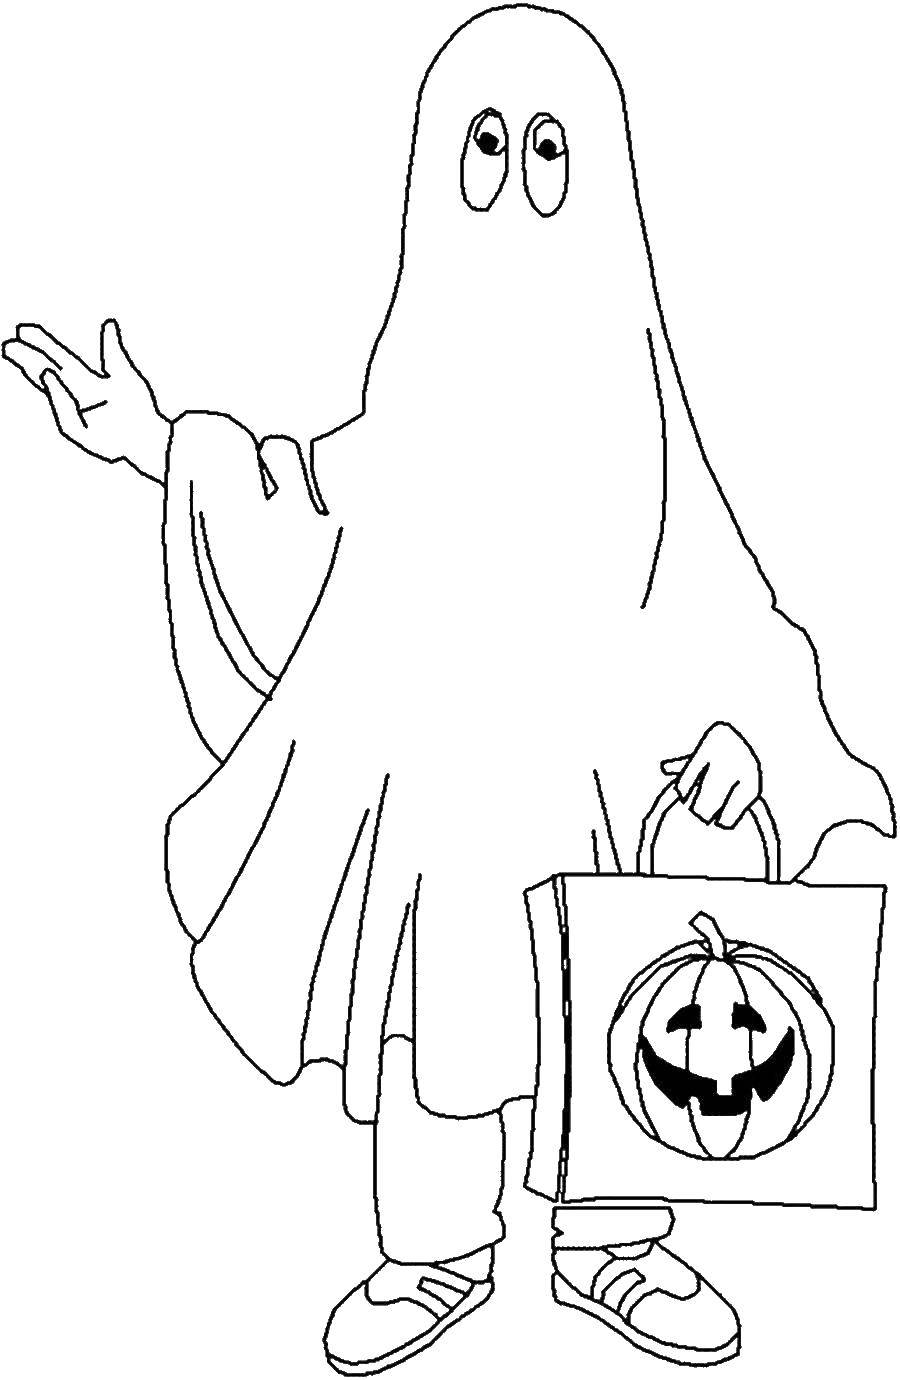 Coloring Trick-or-treating. Category Halloween. Tags:  Halloween Ghost, .